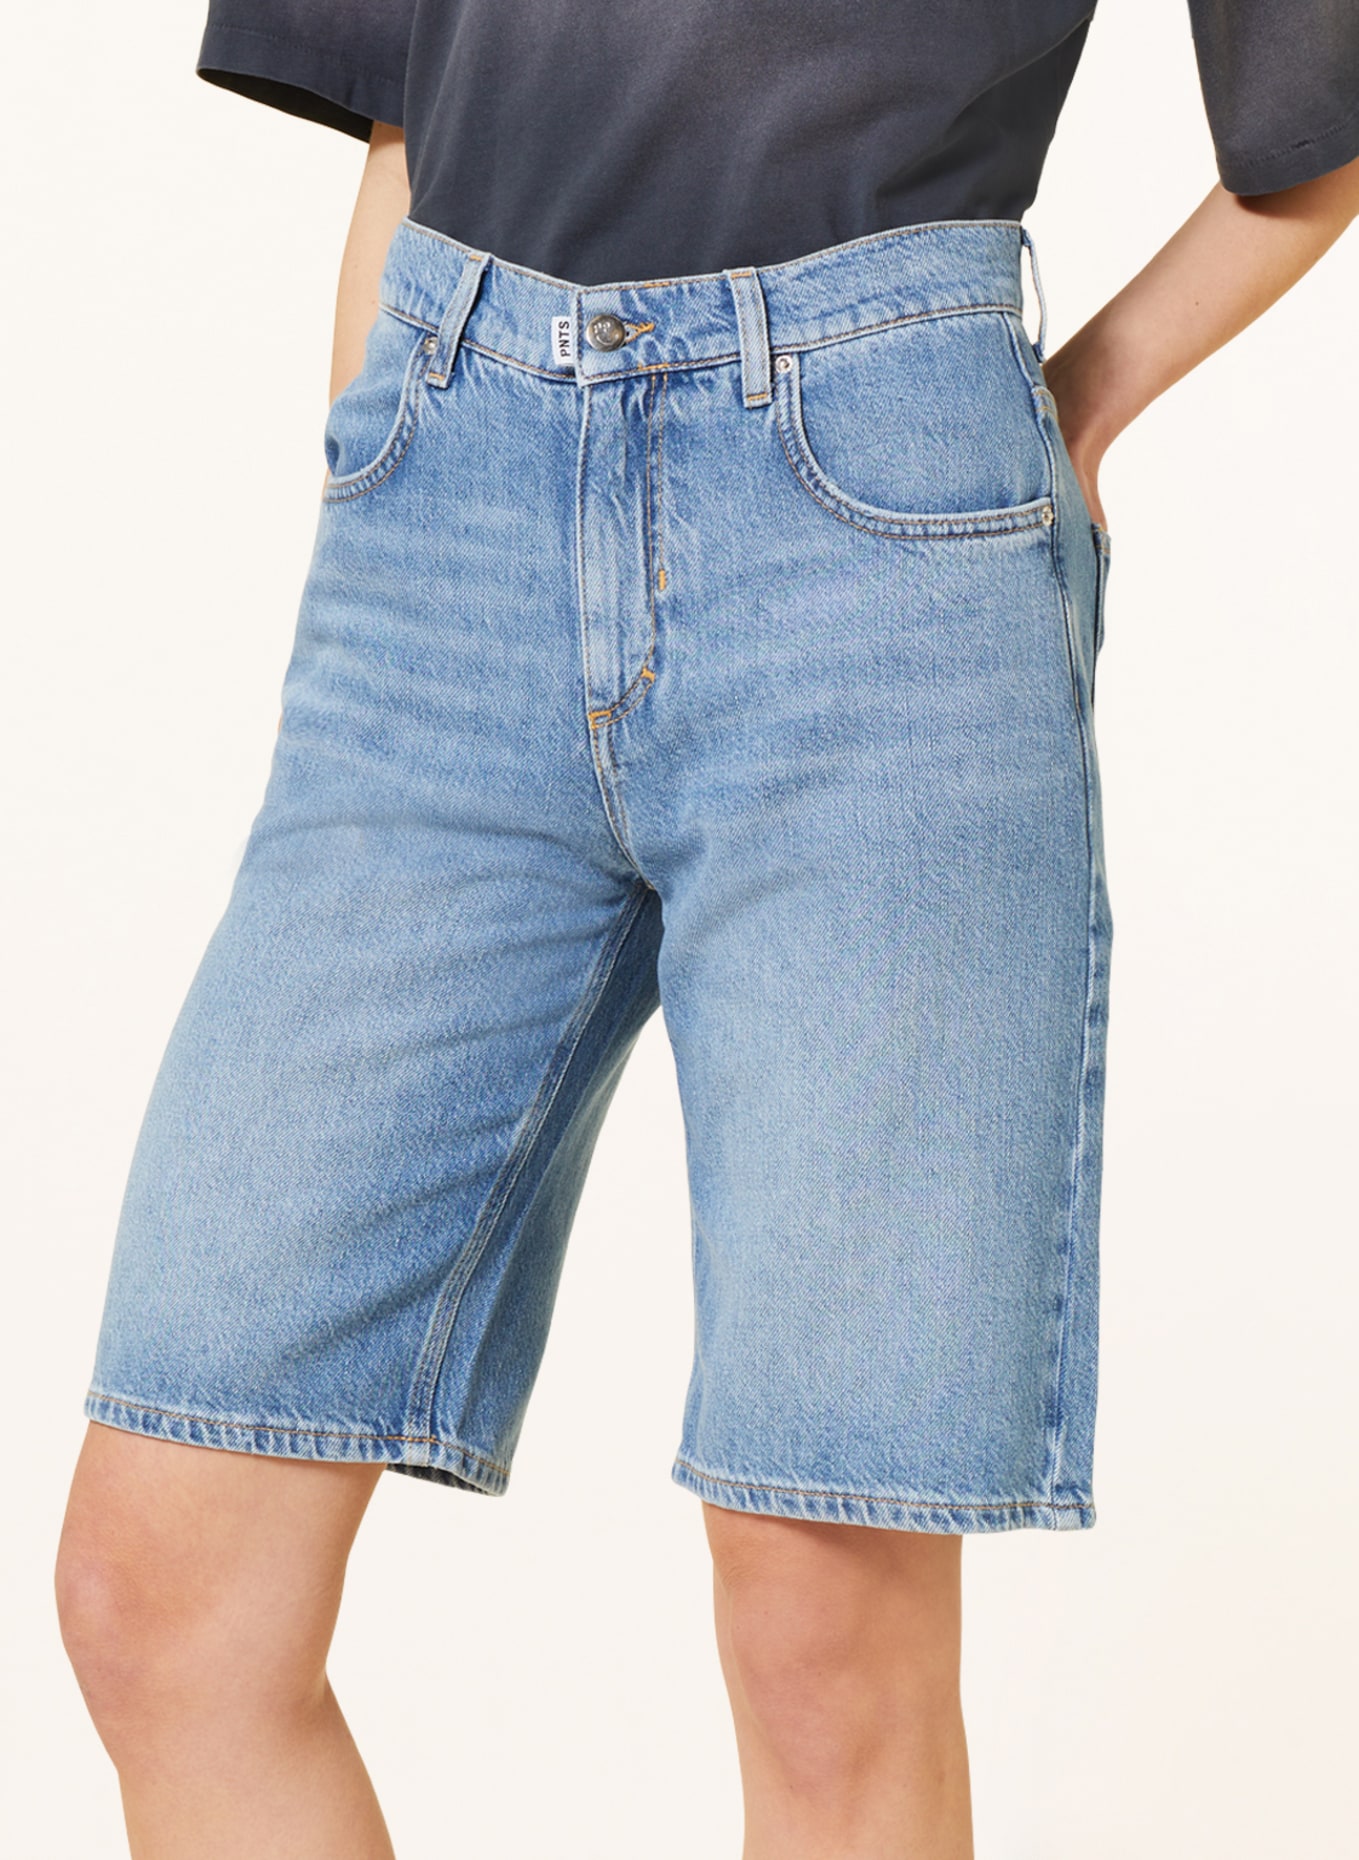 PNTS Jeansshorts THE BAGGY, Farbe: 28 FADED BLUE (Bild 5)